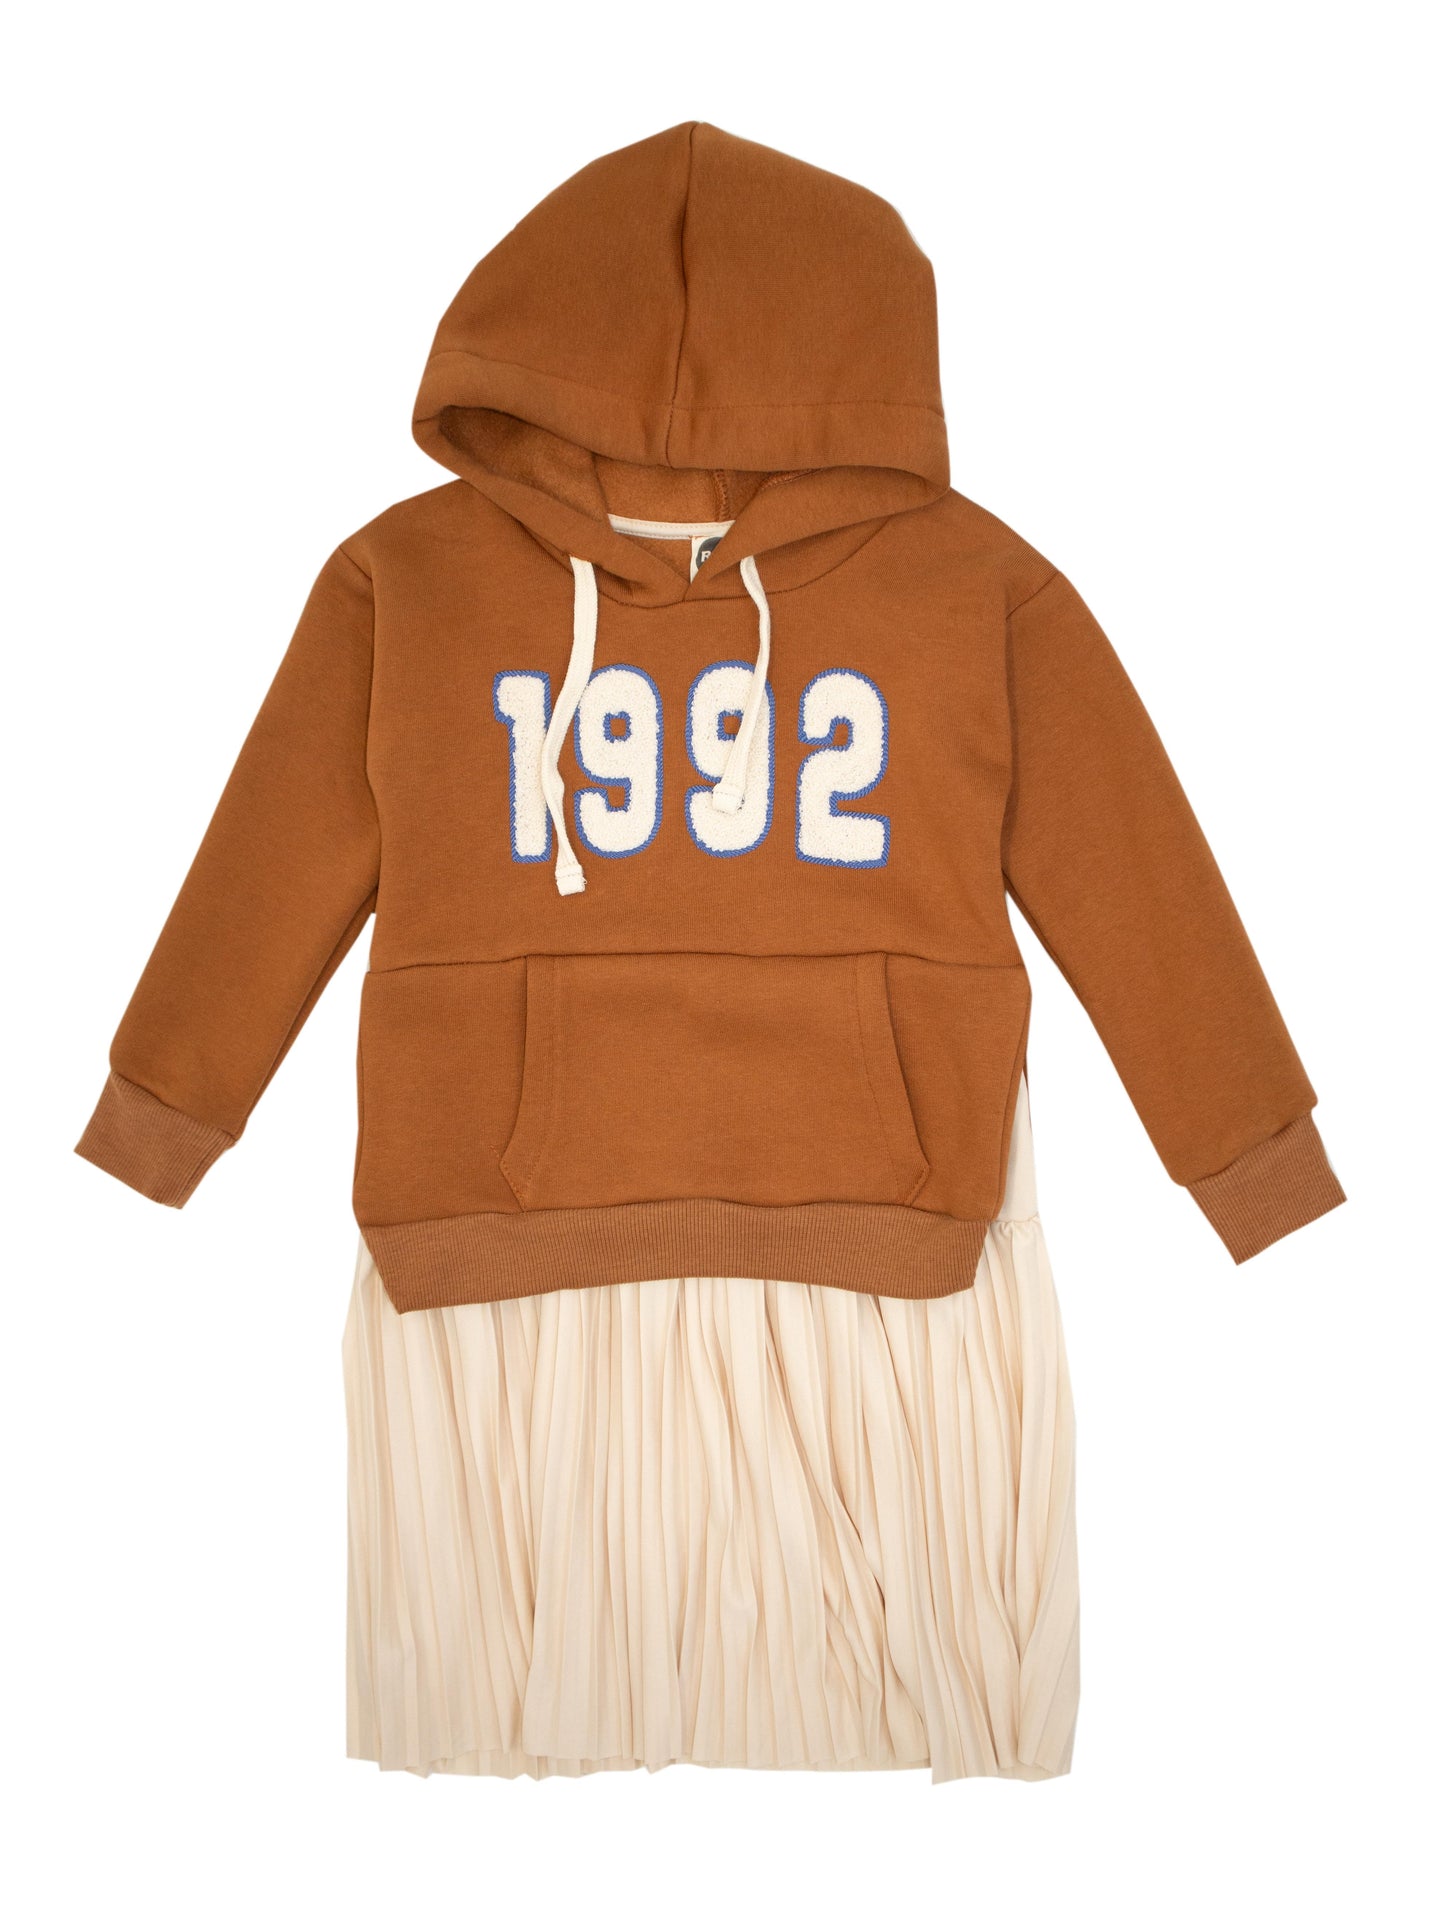 Hooded Kids Sweat Dress with Pleats at the Bottom